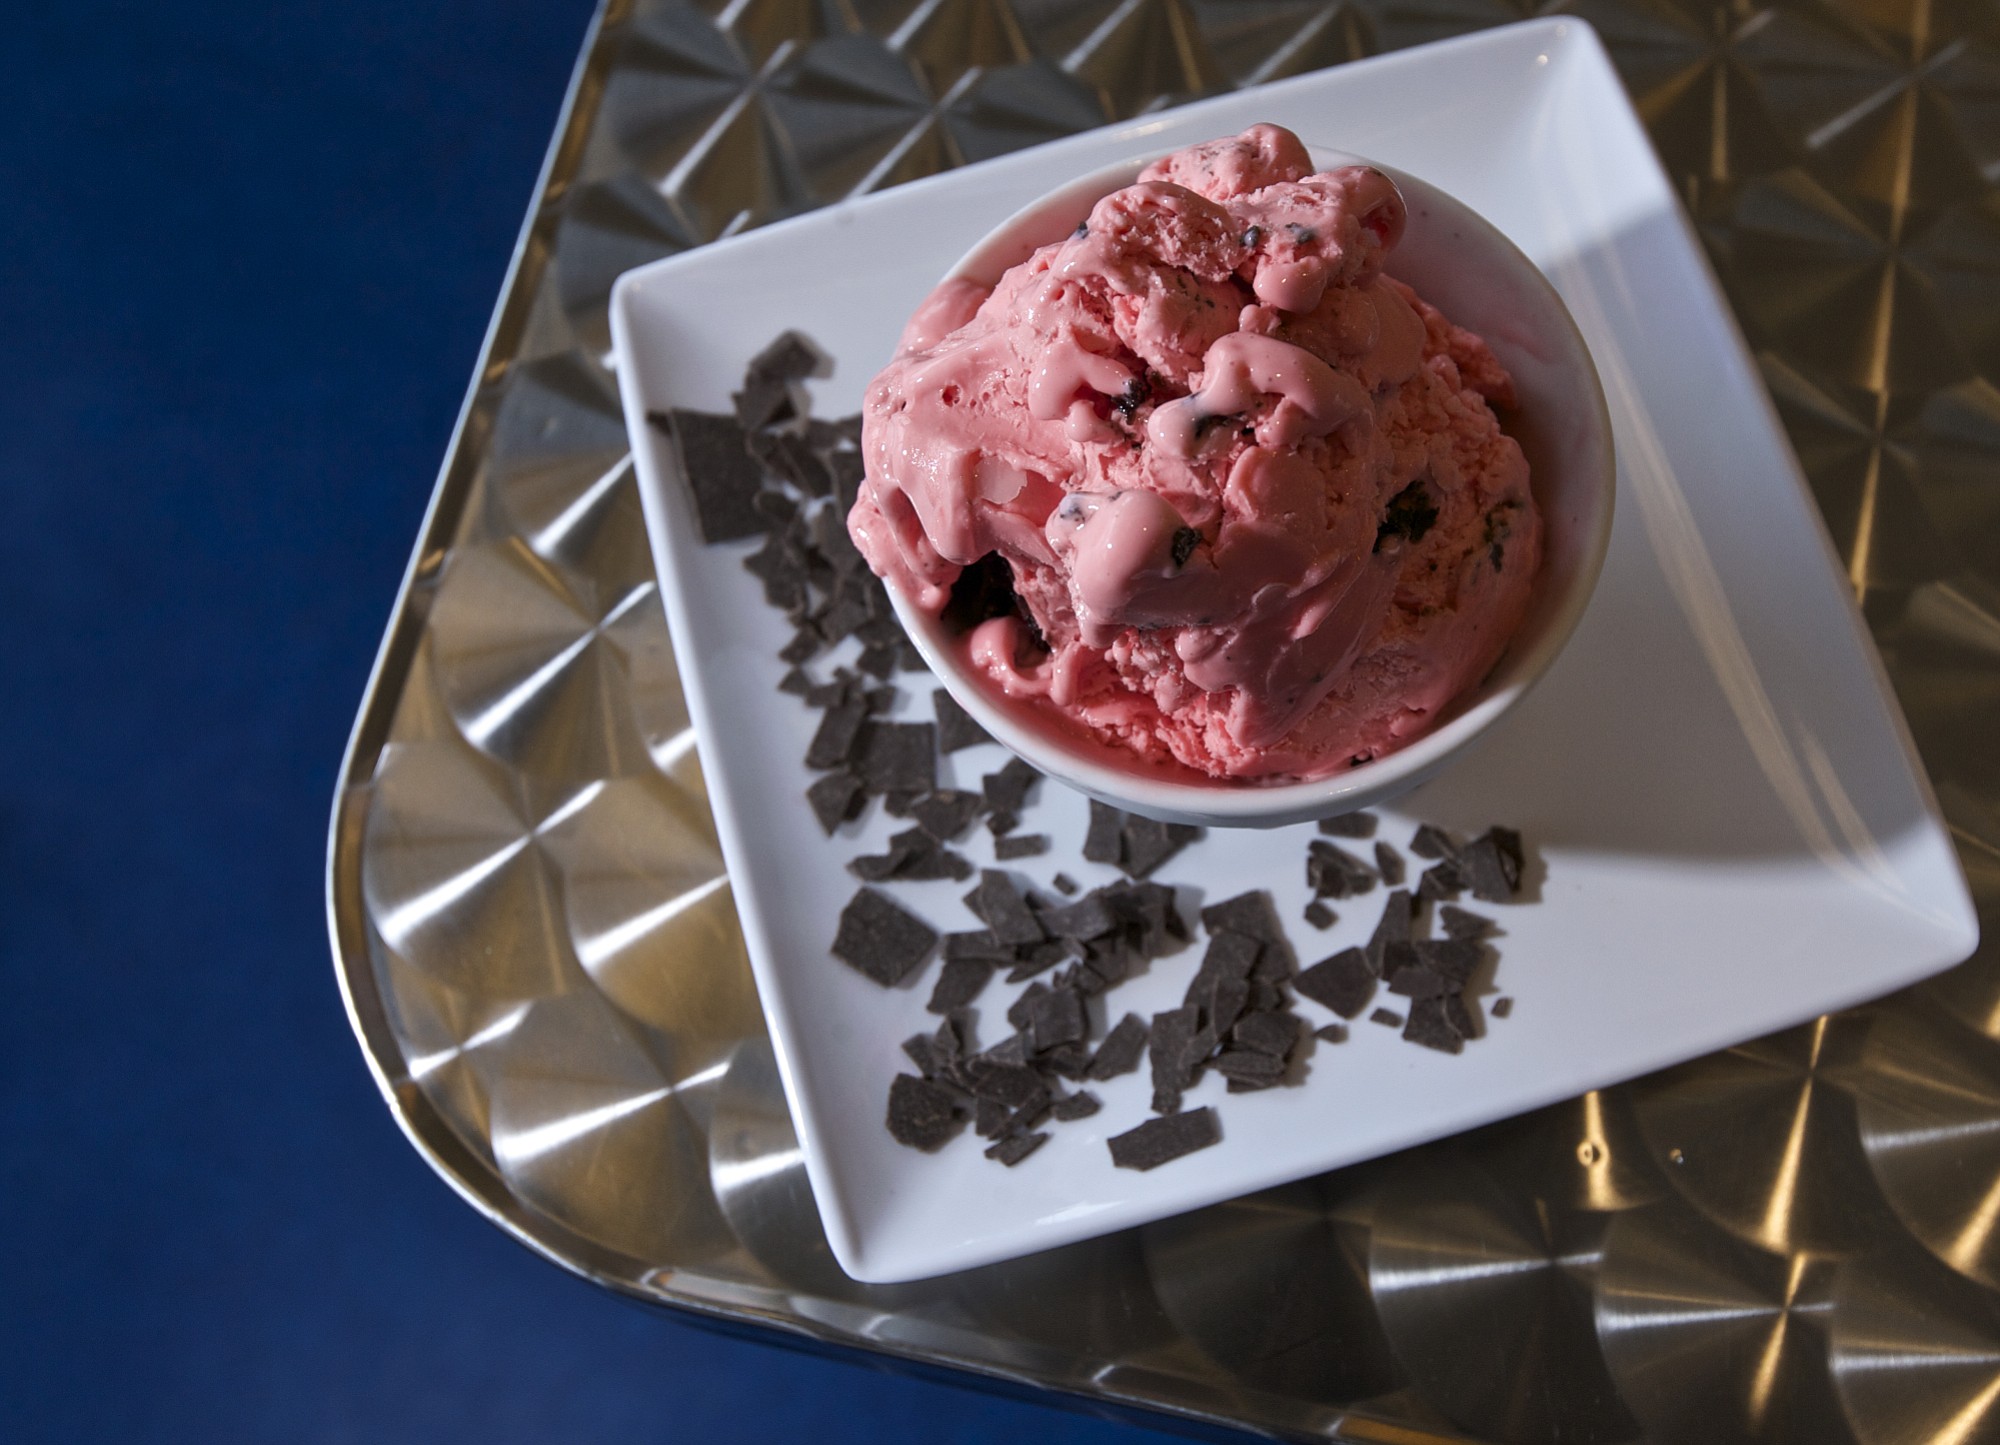 Cherry fudge ice cream with chocolate chips mixed in is served Nov.